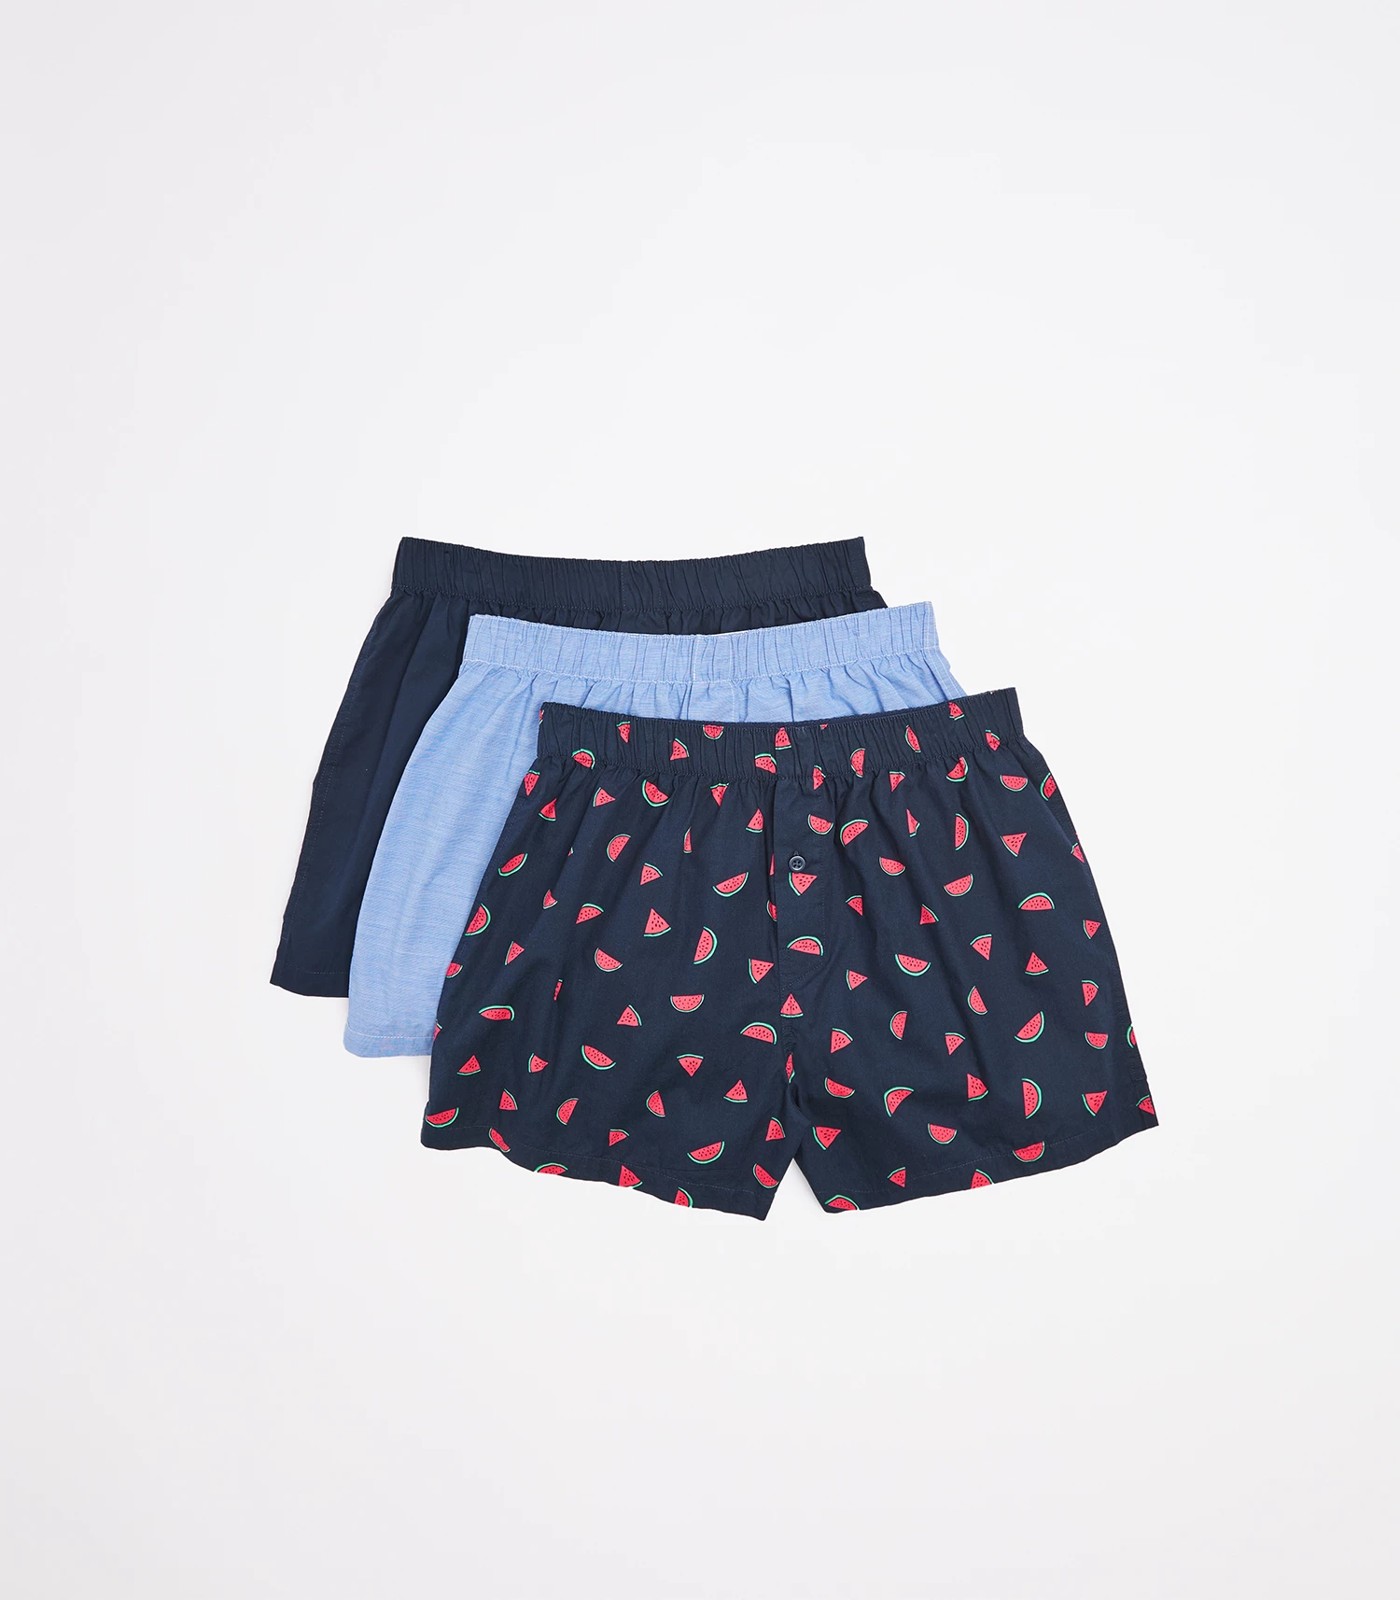 Maxx 3 Pack Woven Boxers - Watermelon